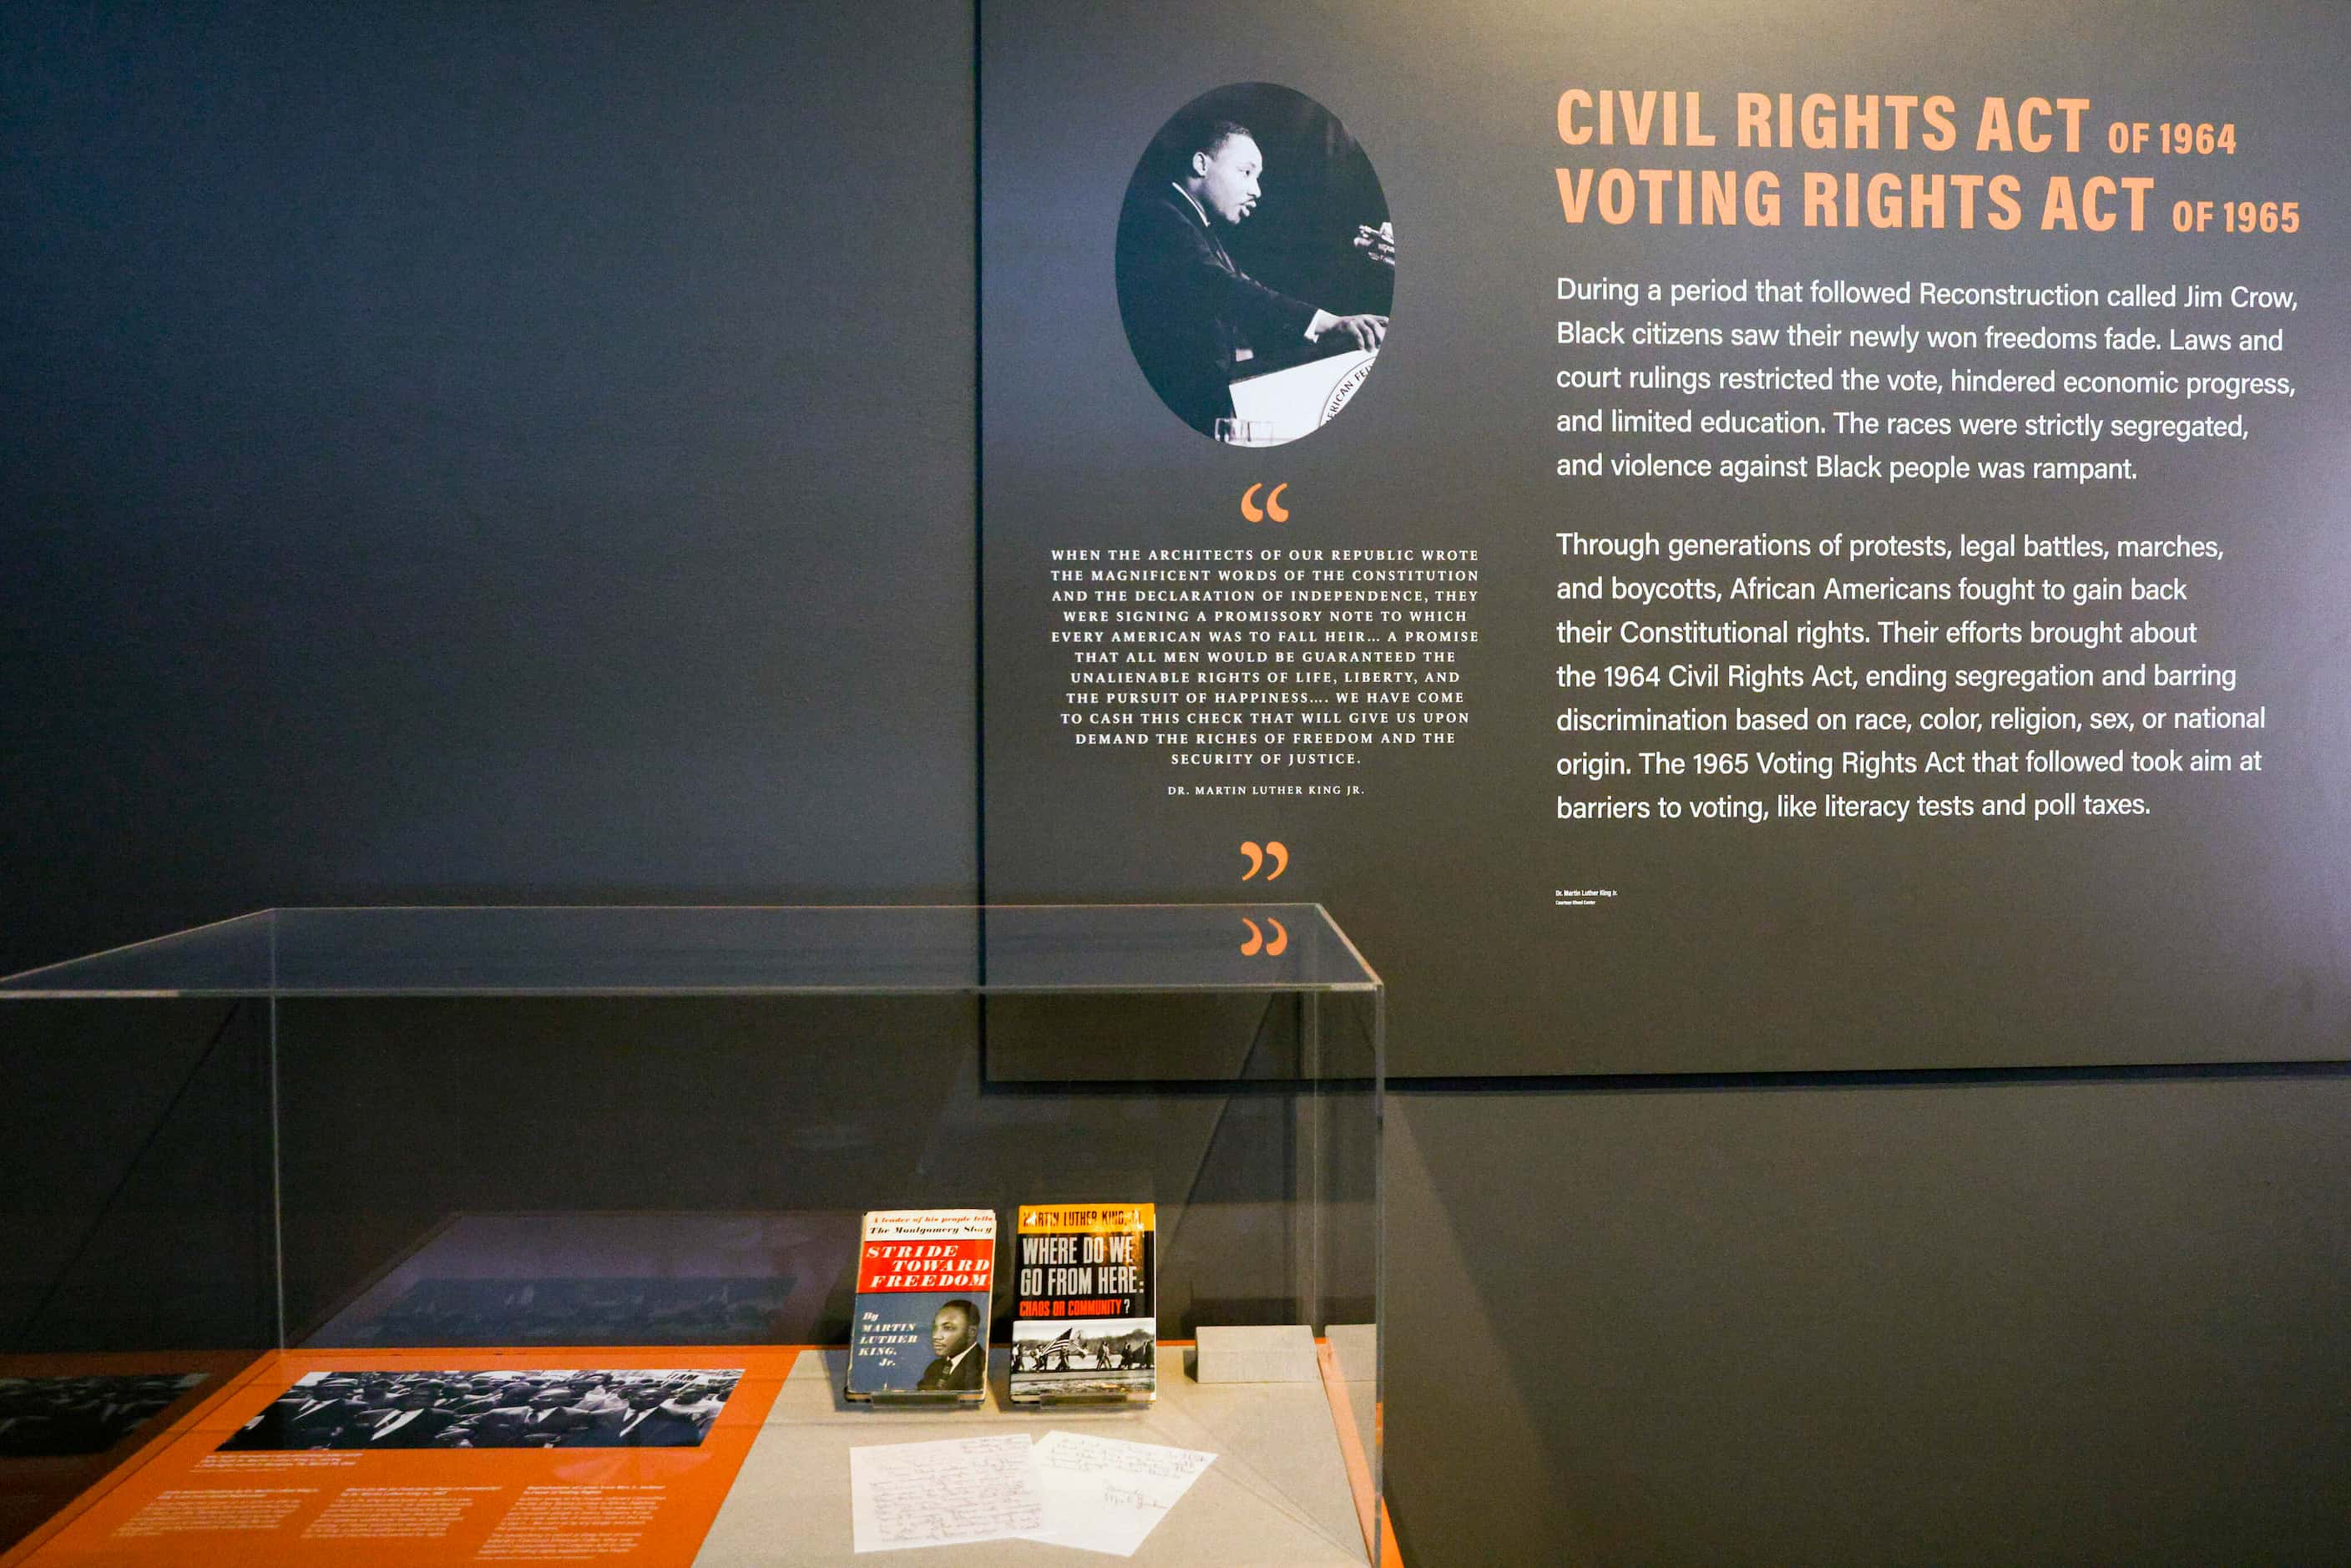 Copies of books written by Martin Luther King Jr. sit on display at the Freedom Matters...